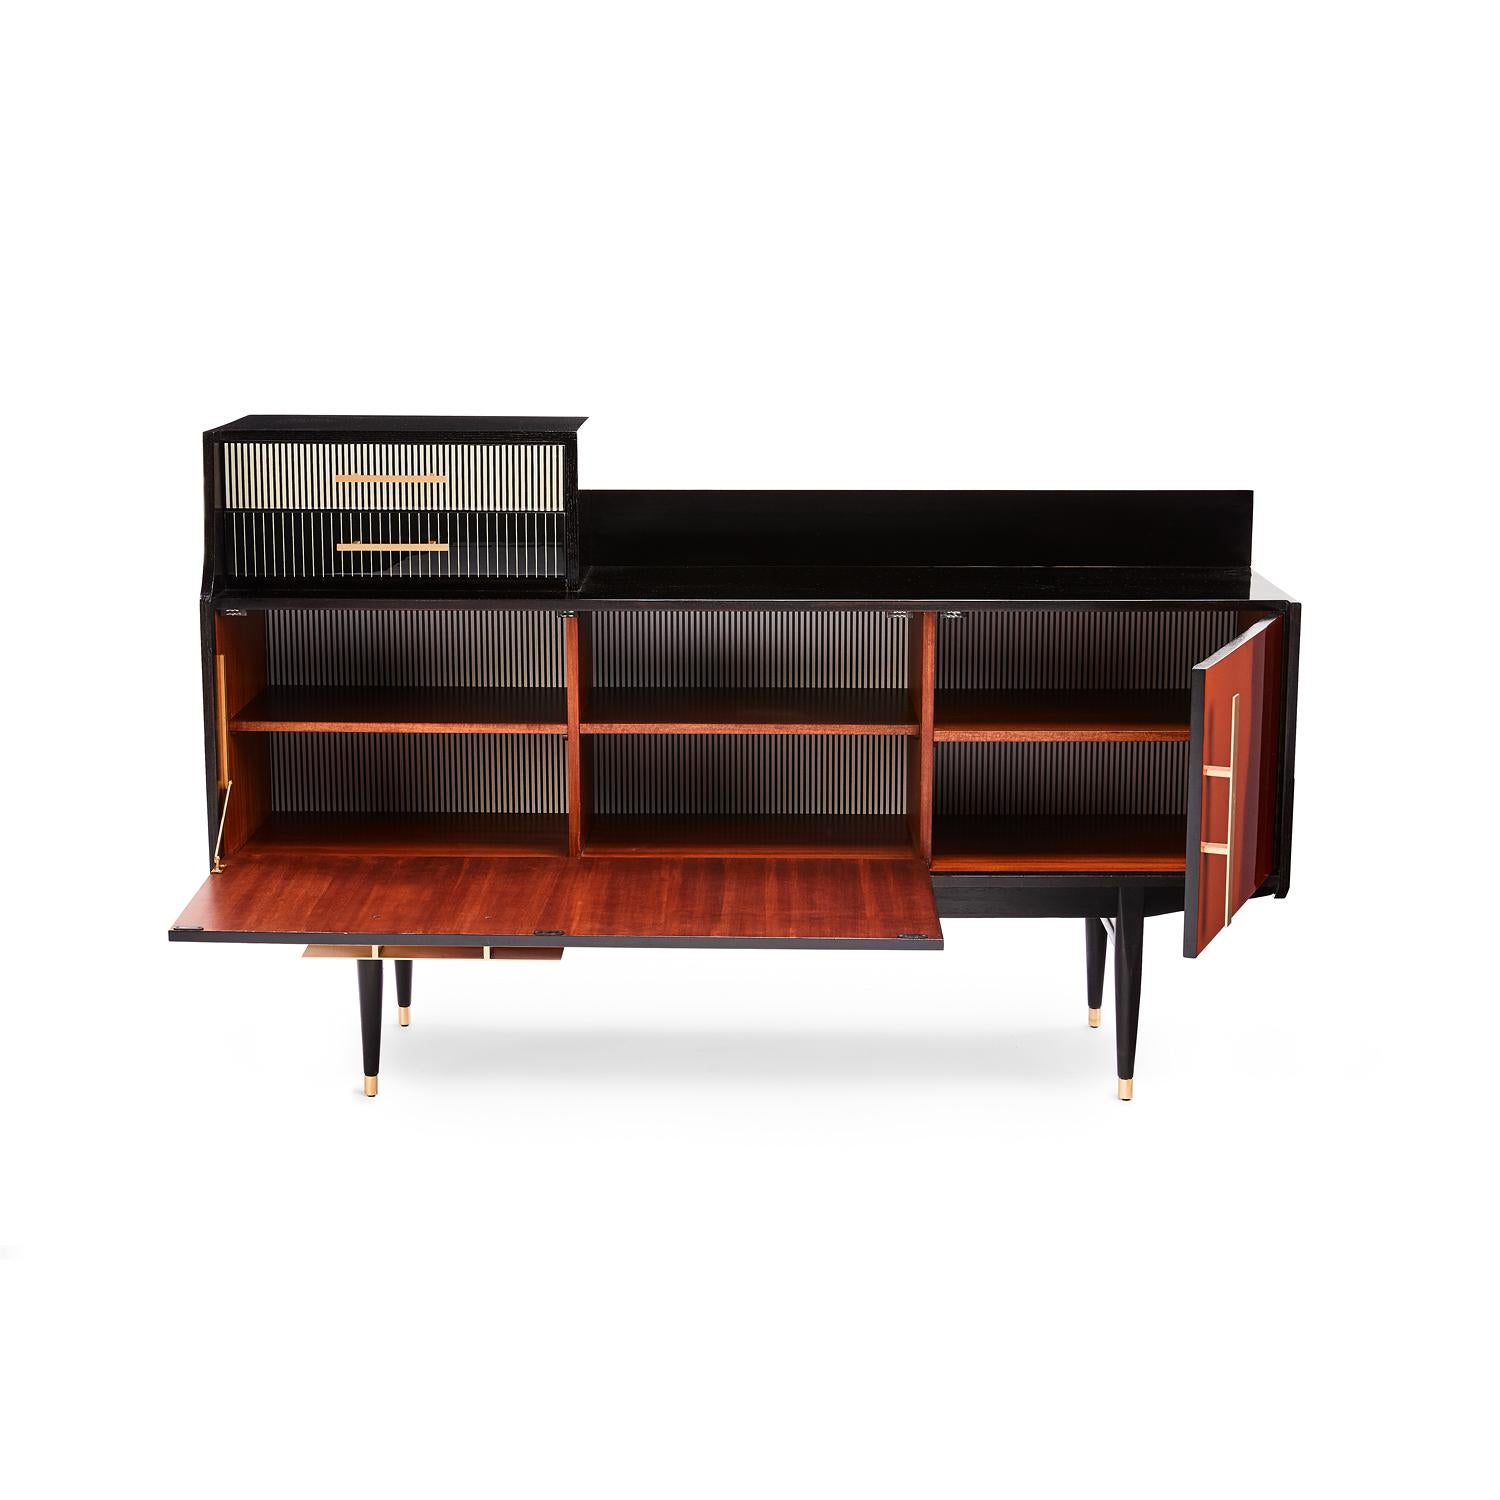 Baxter Bea cabinet dark stained and natural-oil finished rosewood accentuating dark amber gradation with satin brass hardware by Draga & Aurel

Designed By Draga & Aurel salone, 2018
Measures: 155 x 41 x 97 H cm, made in Italy.